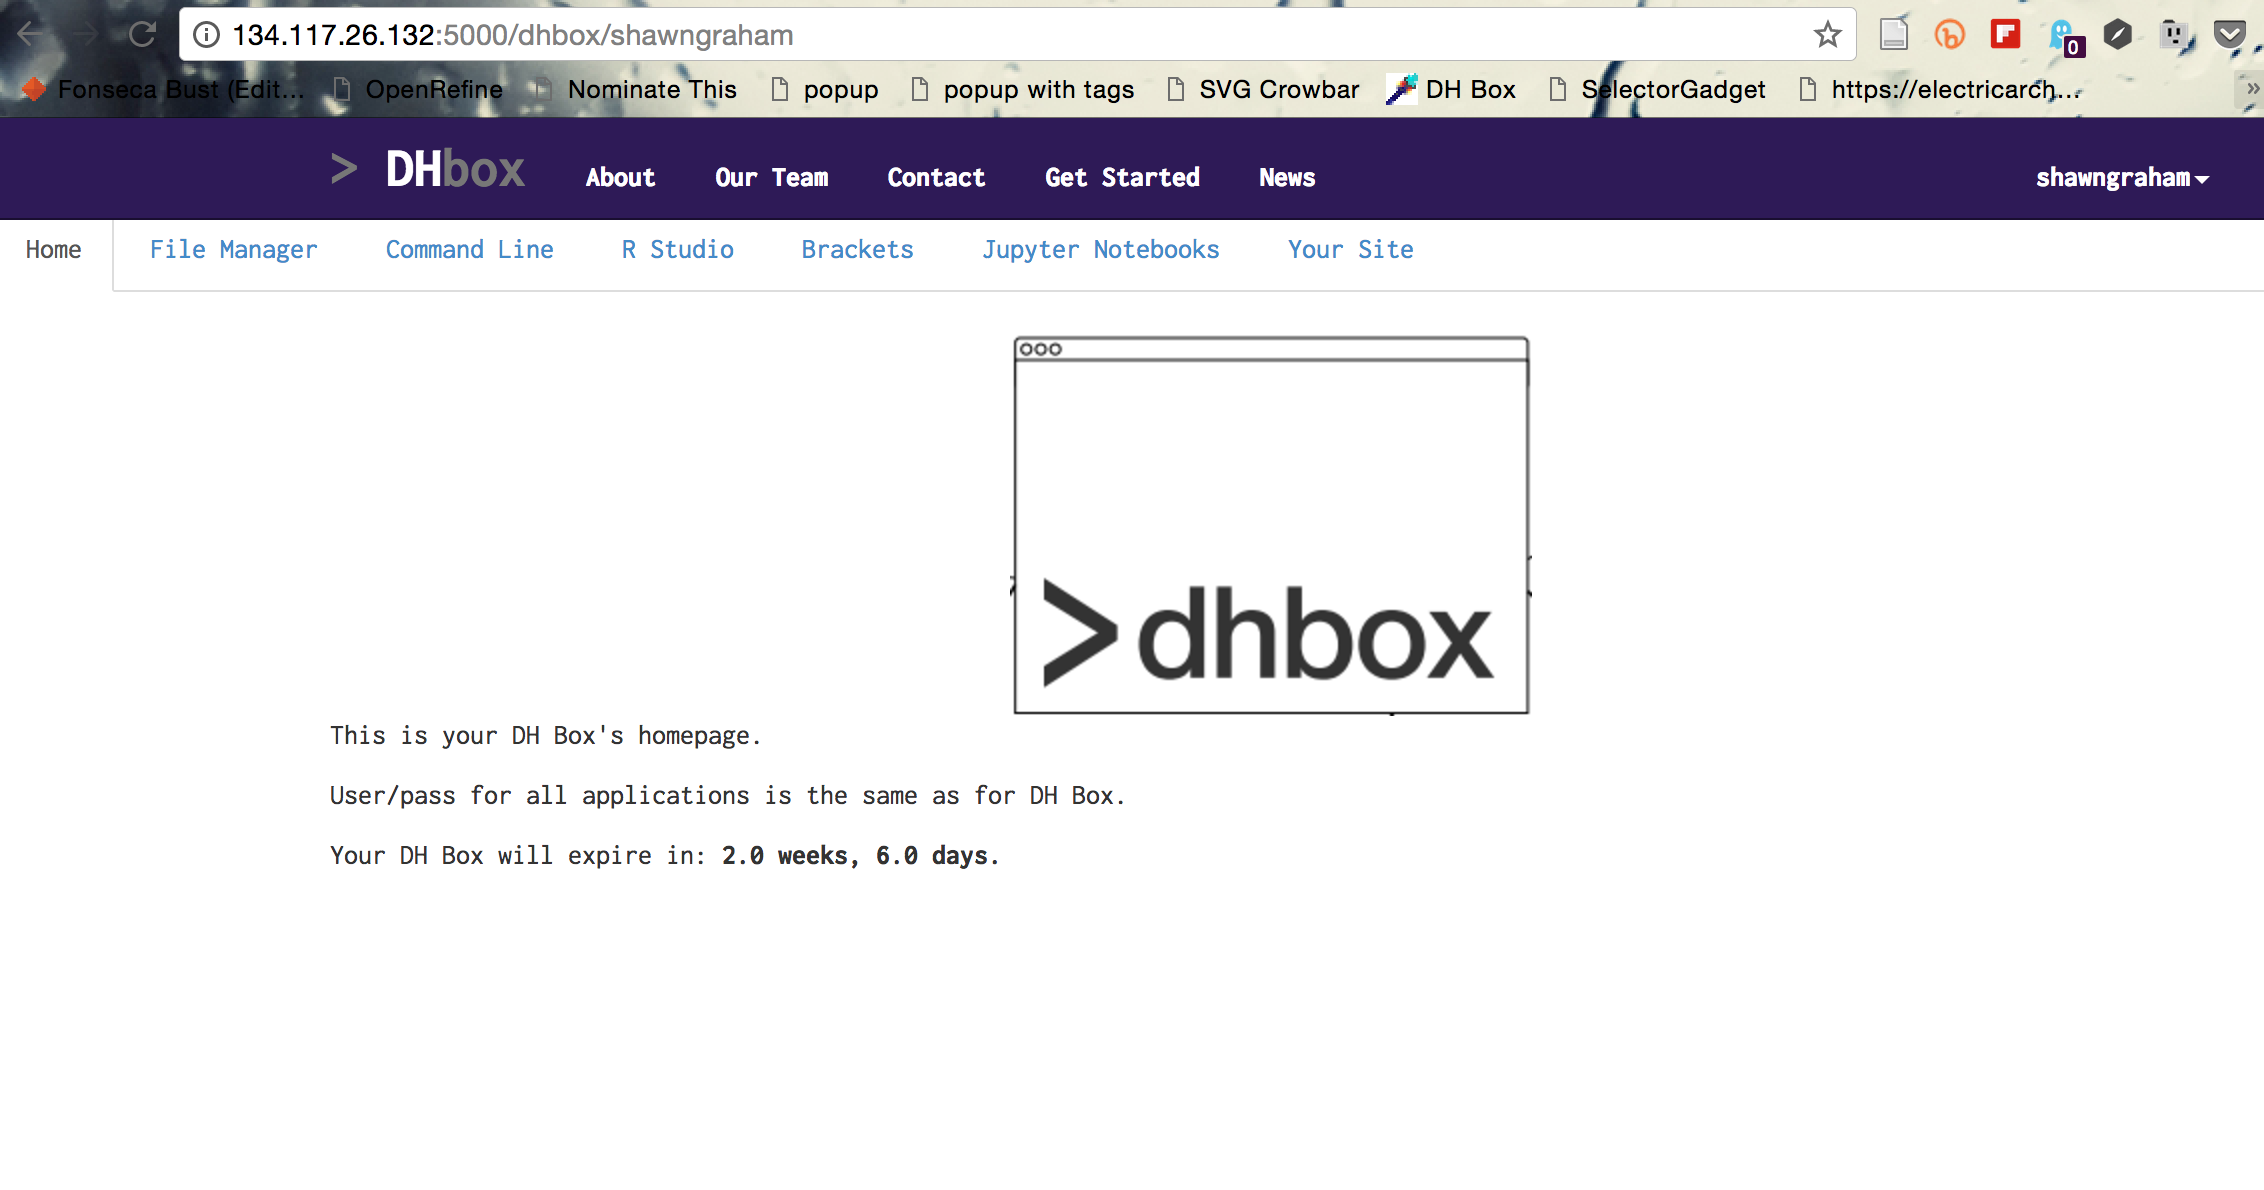 The applications in DHBox